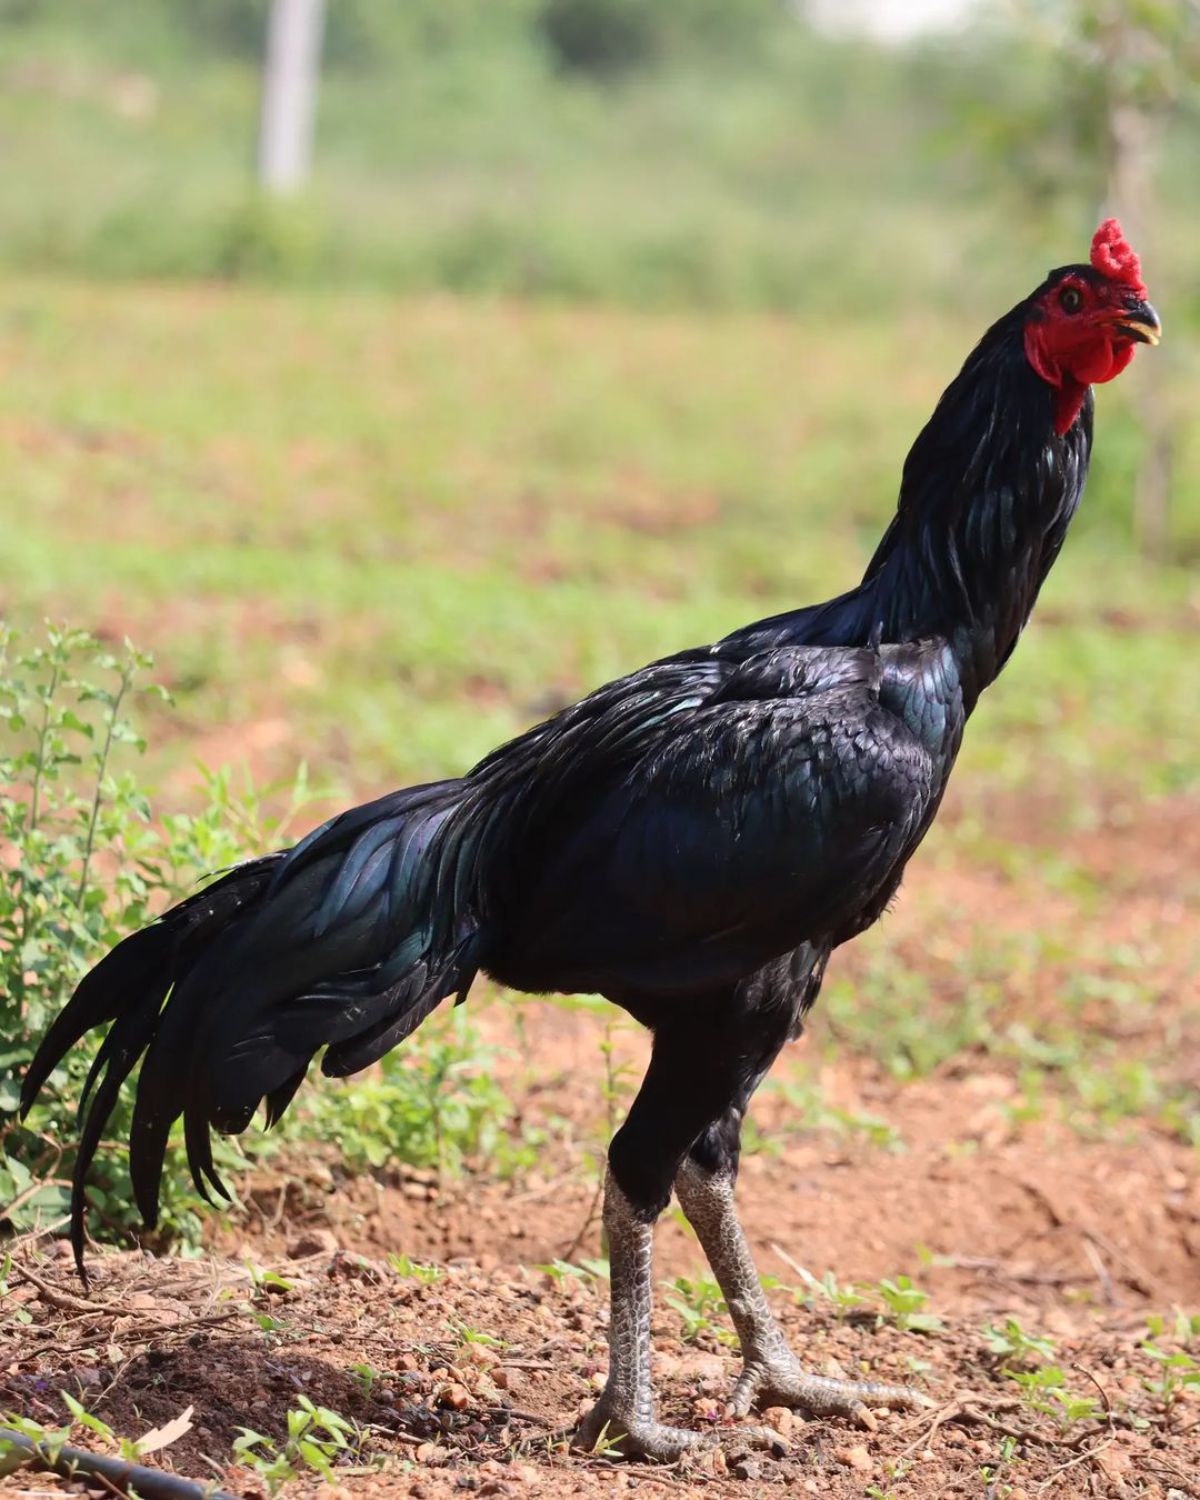 A tall Ga Noi rooster in a backyard.